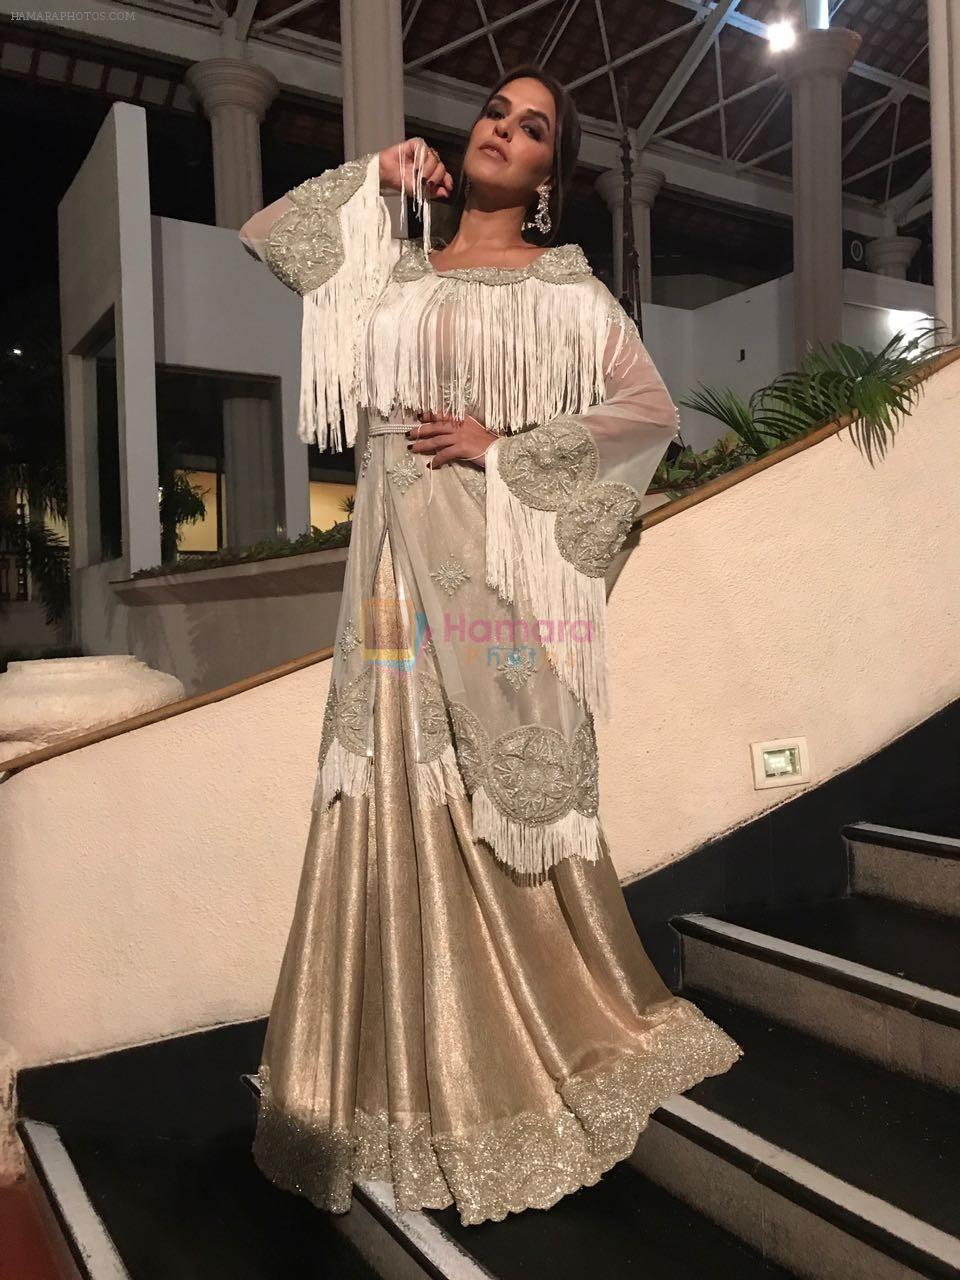 Neha Dhupia In faraz Manan and Anmol jewels for hosting a wedding event in goa